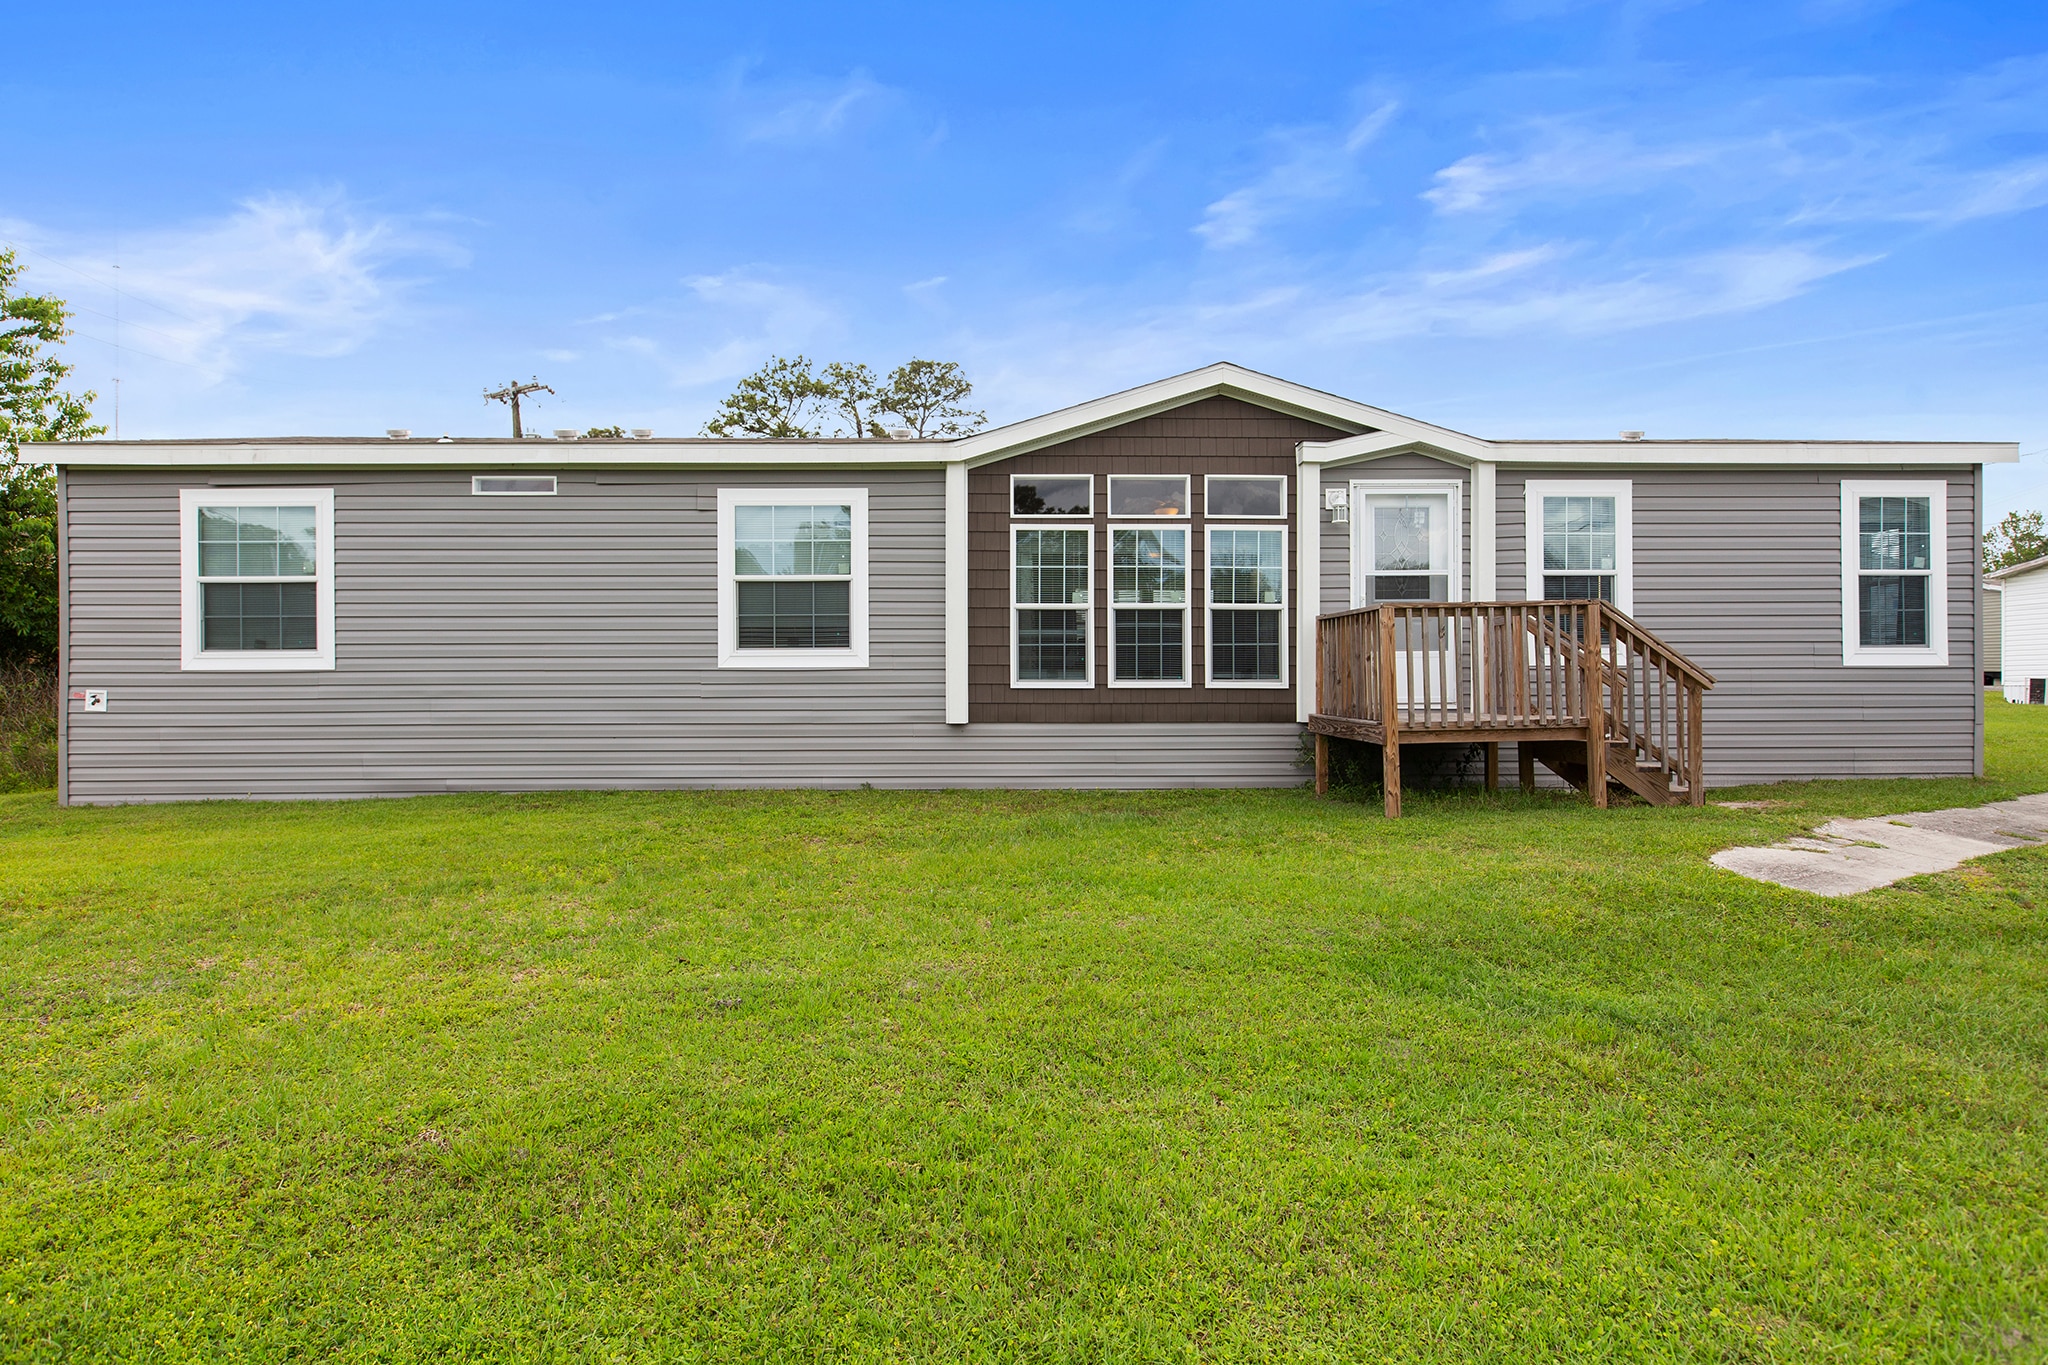 How to Buy a New Manufactured Home: From Research to Key Turn!